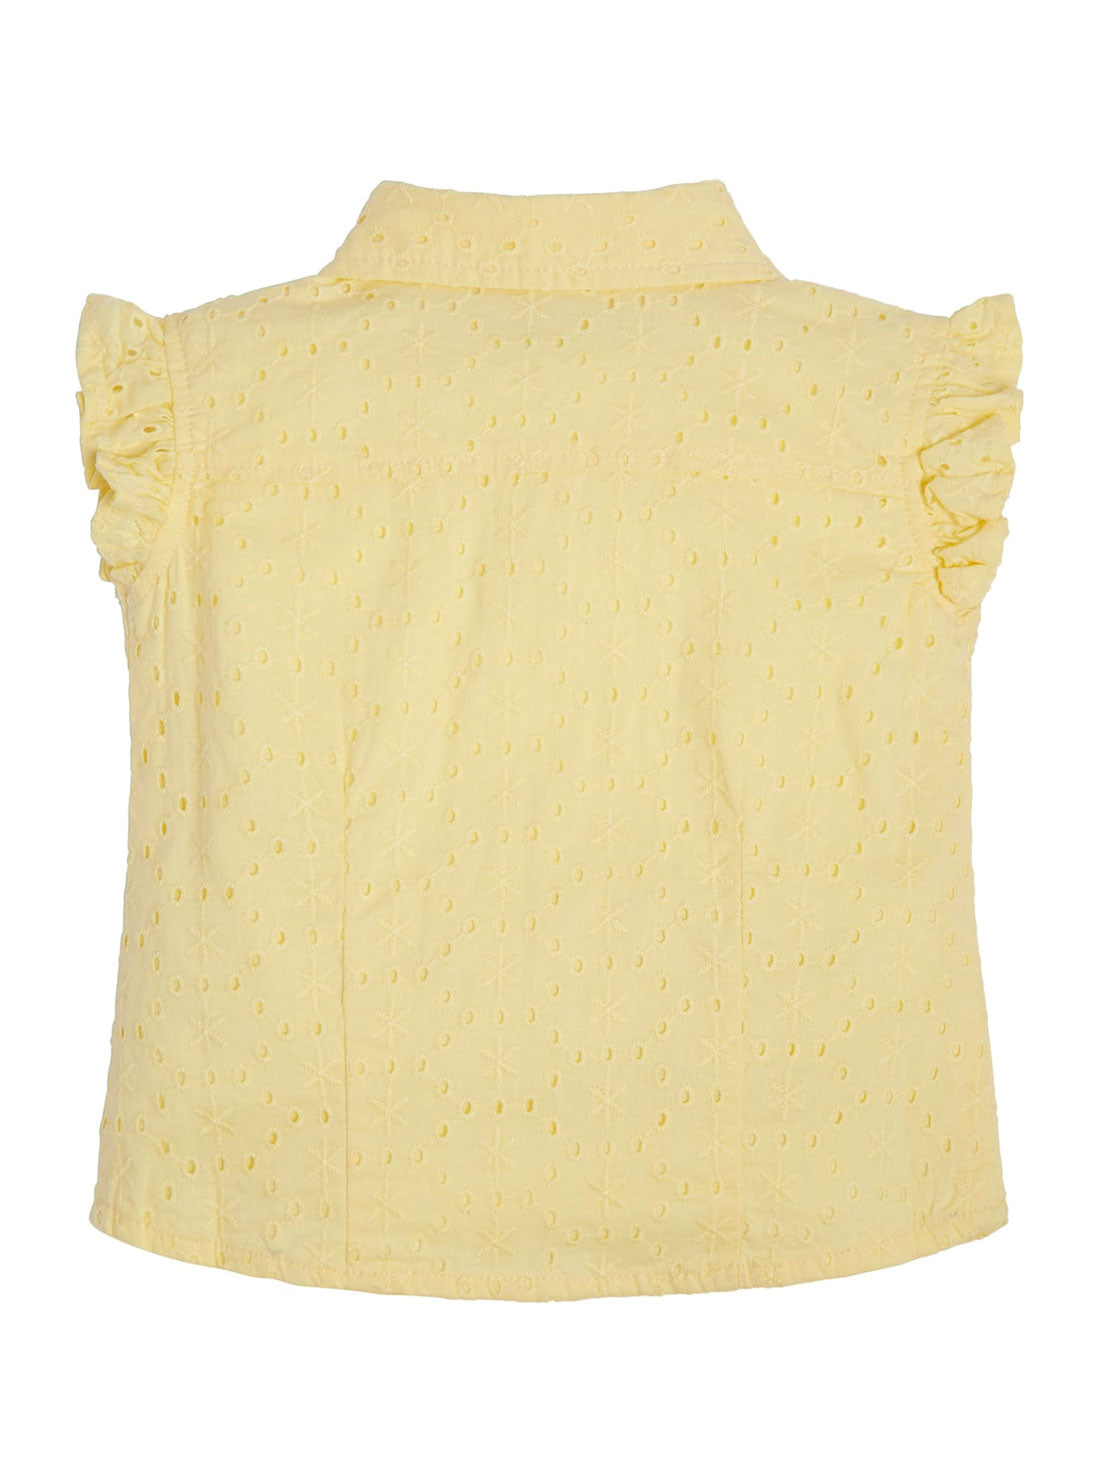 Yellow Sangallo Embroidered Top | GUESS Kids | back view